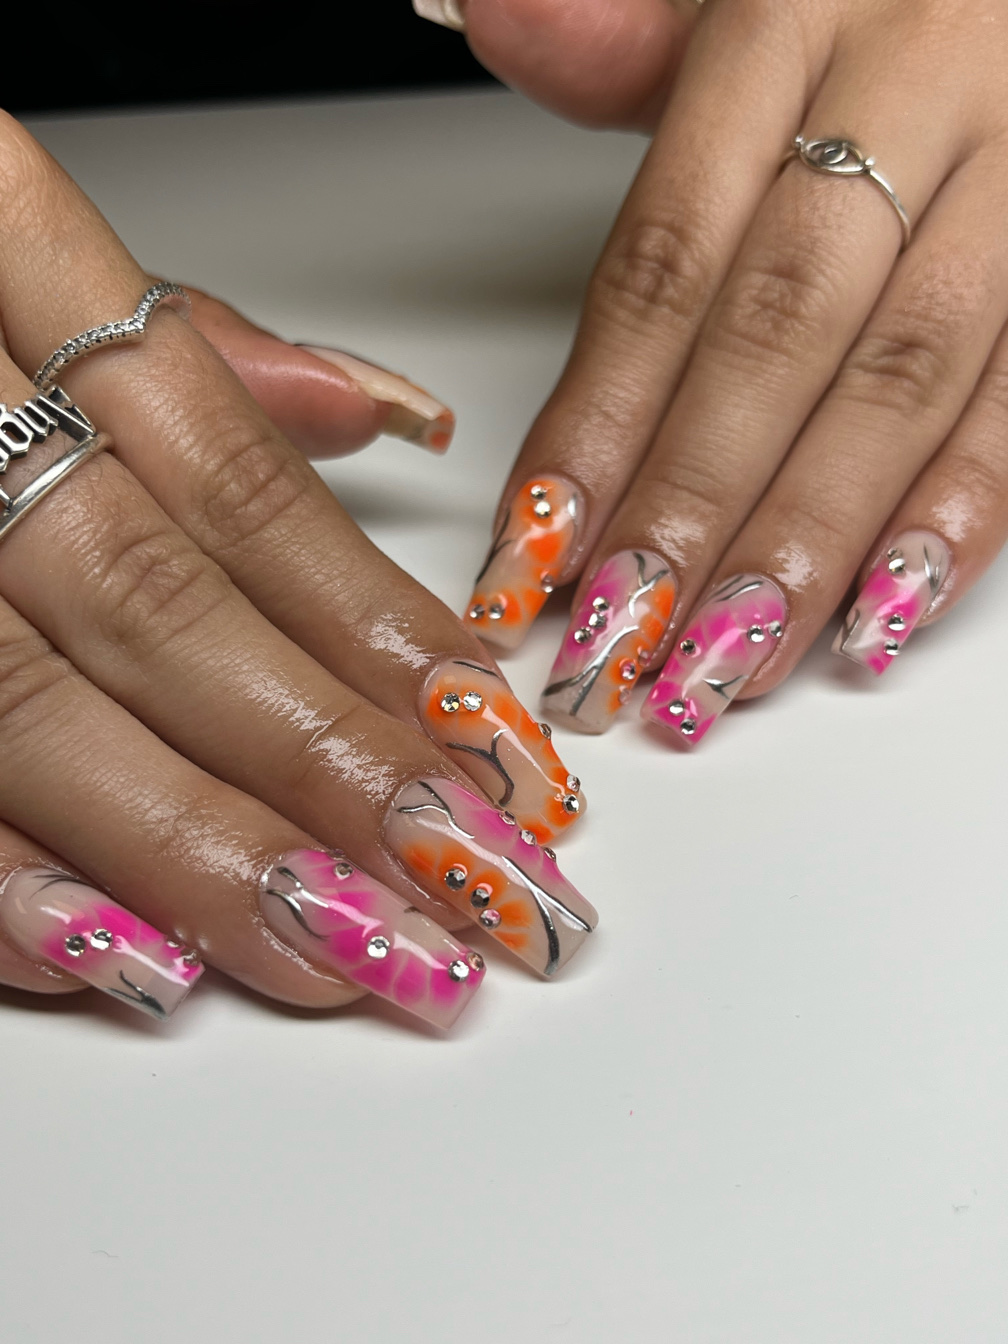 Country nail in Selden NY | Country nails, Manicure and pedicure, Nail  designs